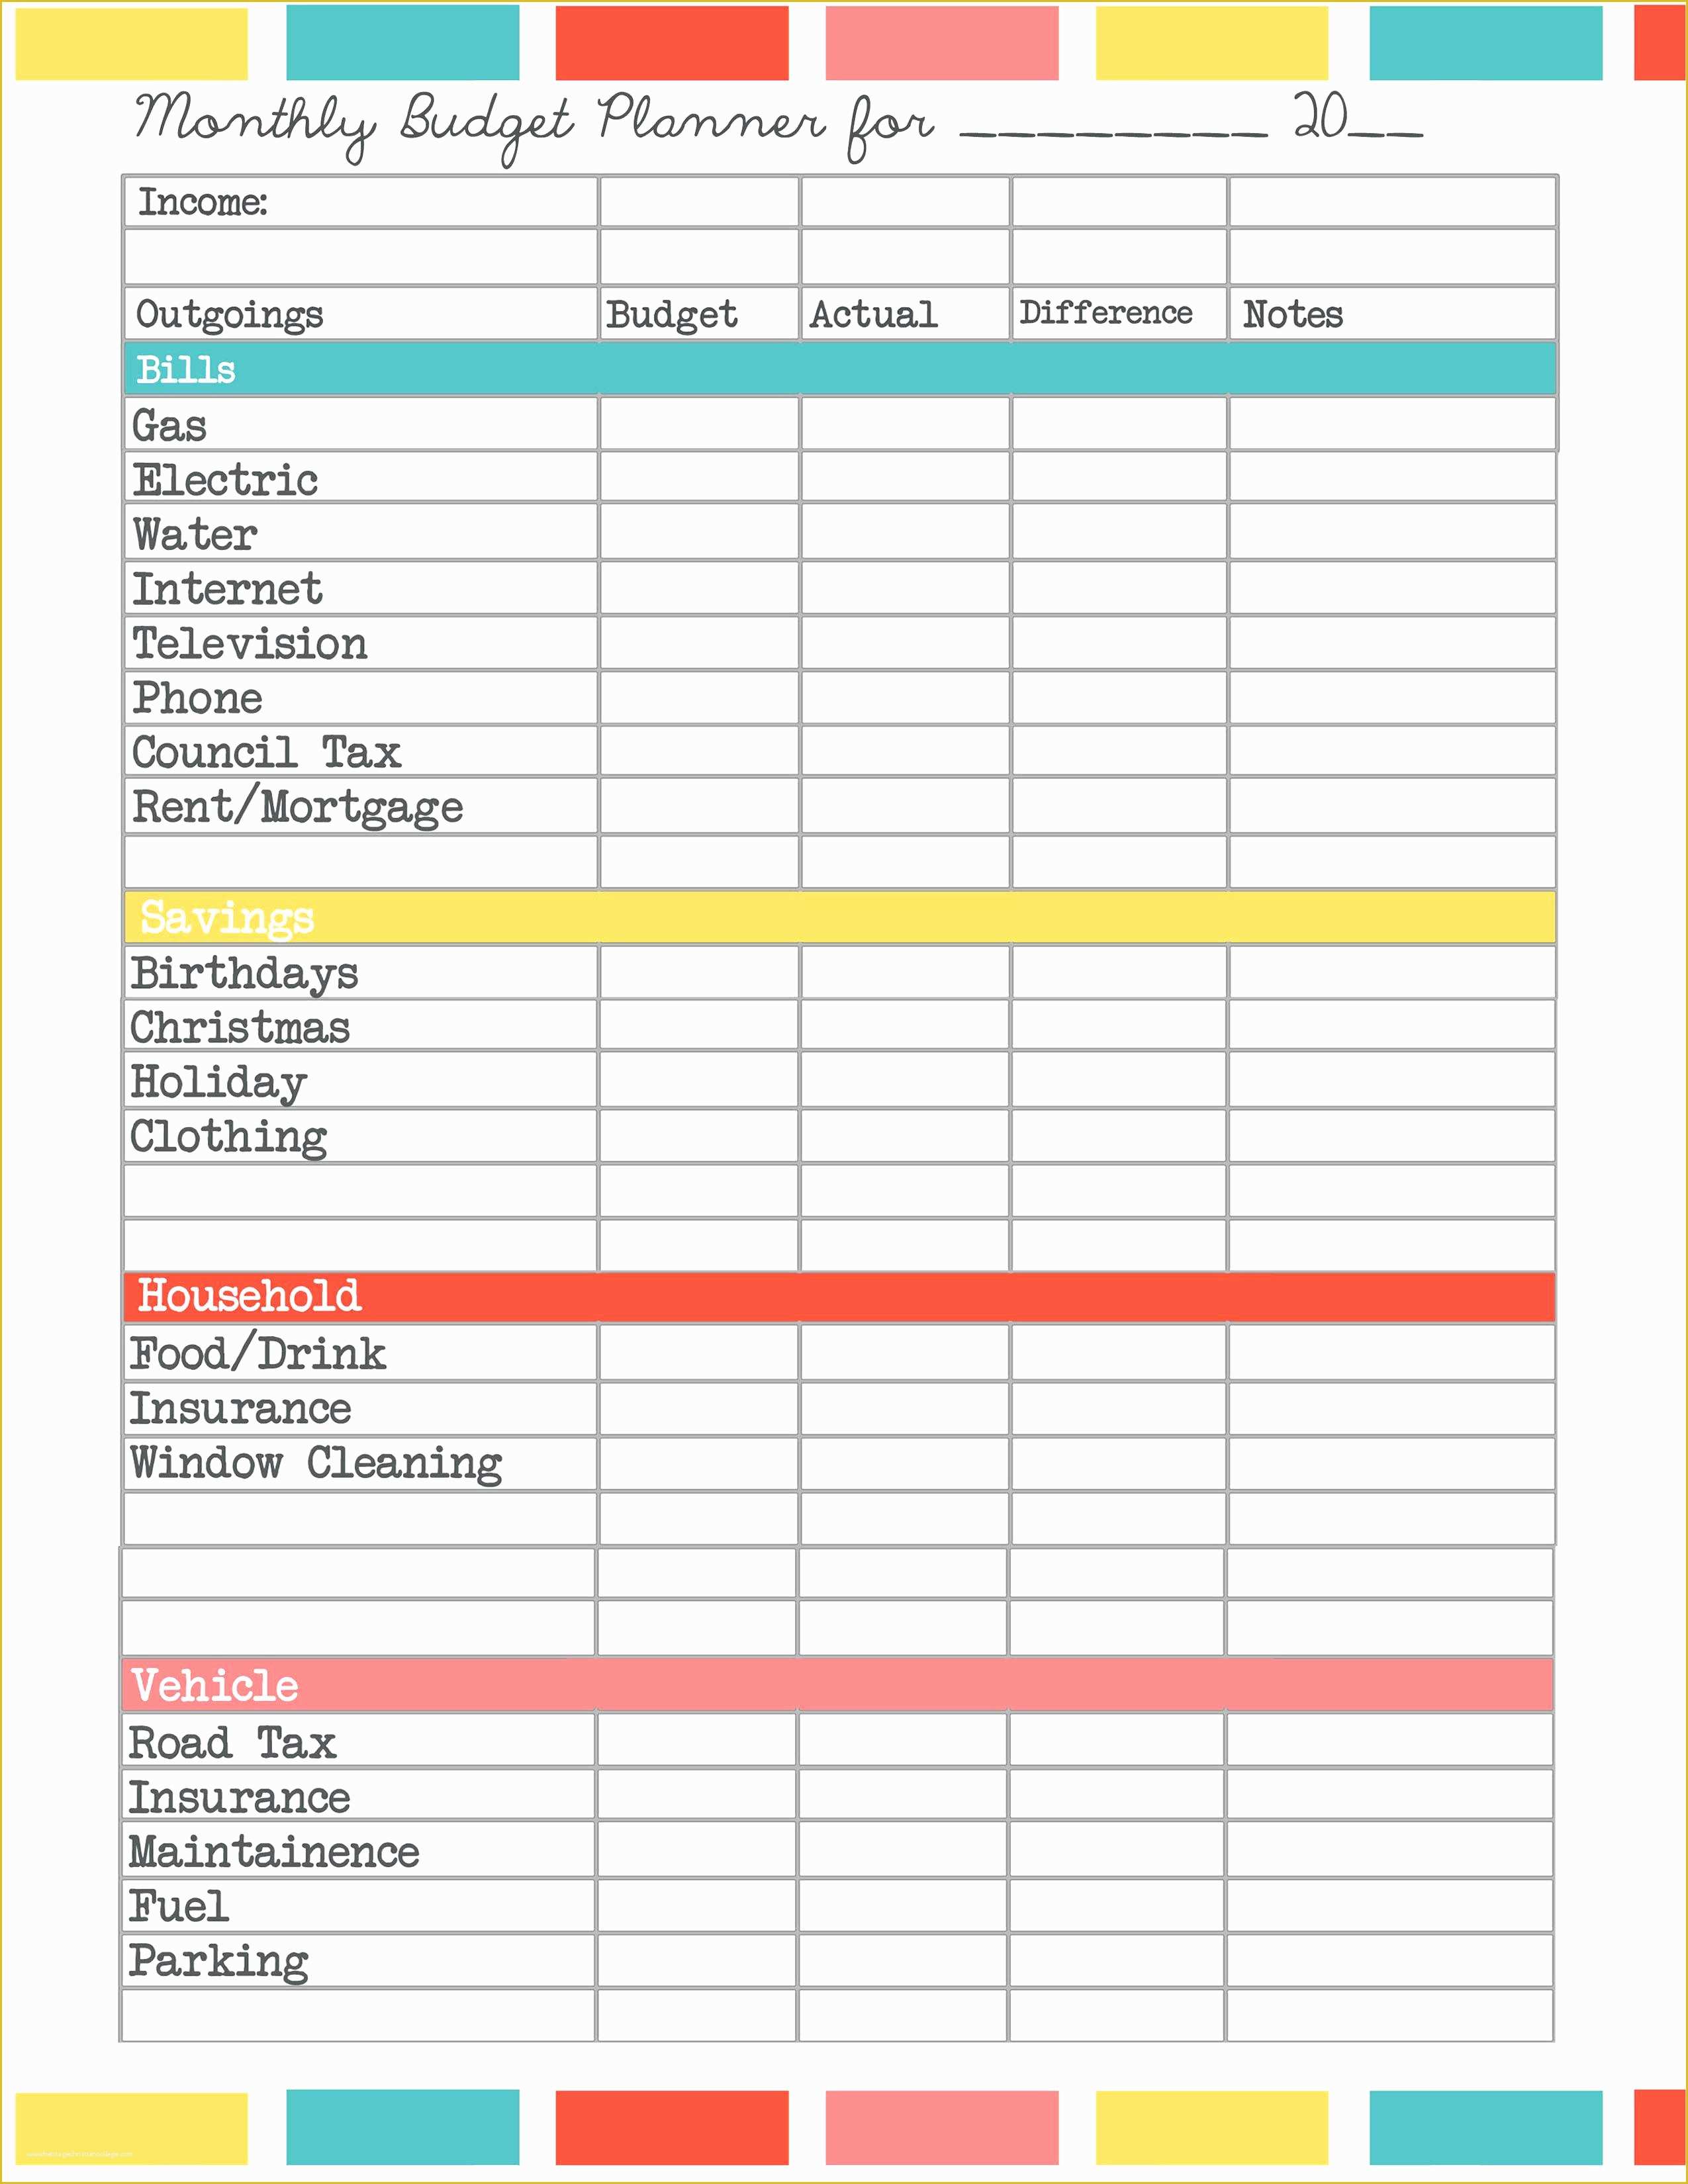 Monthly Budget Sheet Template Free Of Worksheets Free Bud Ing Worksheets Cheatslist Free